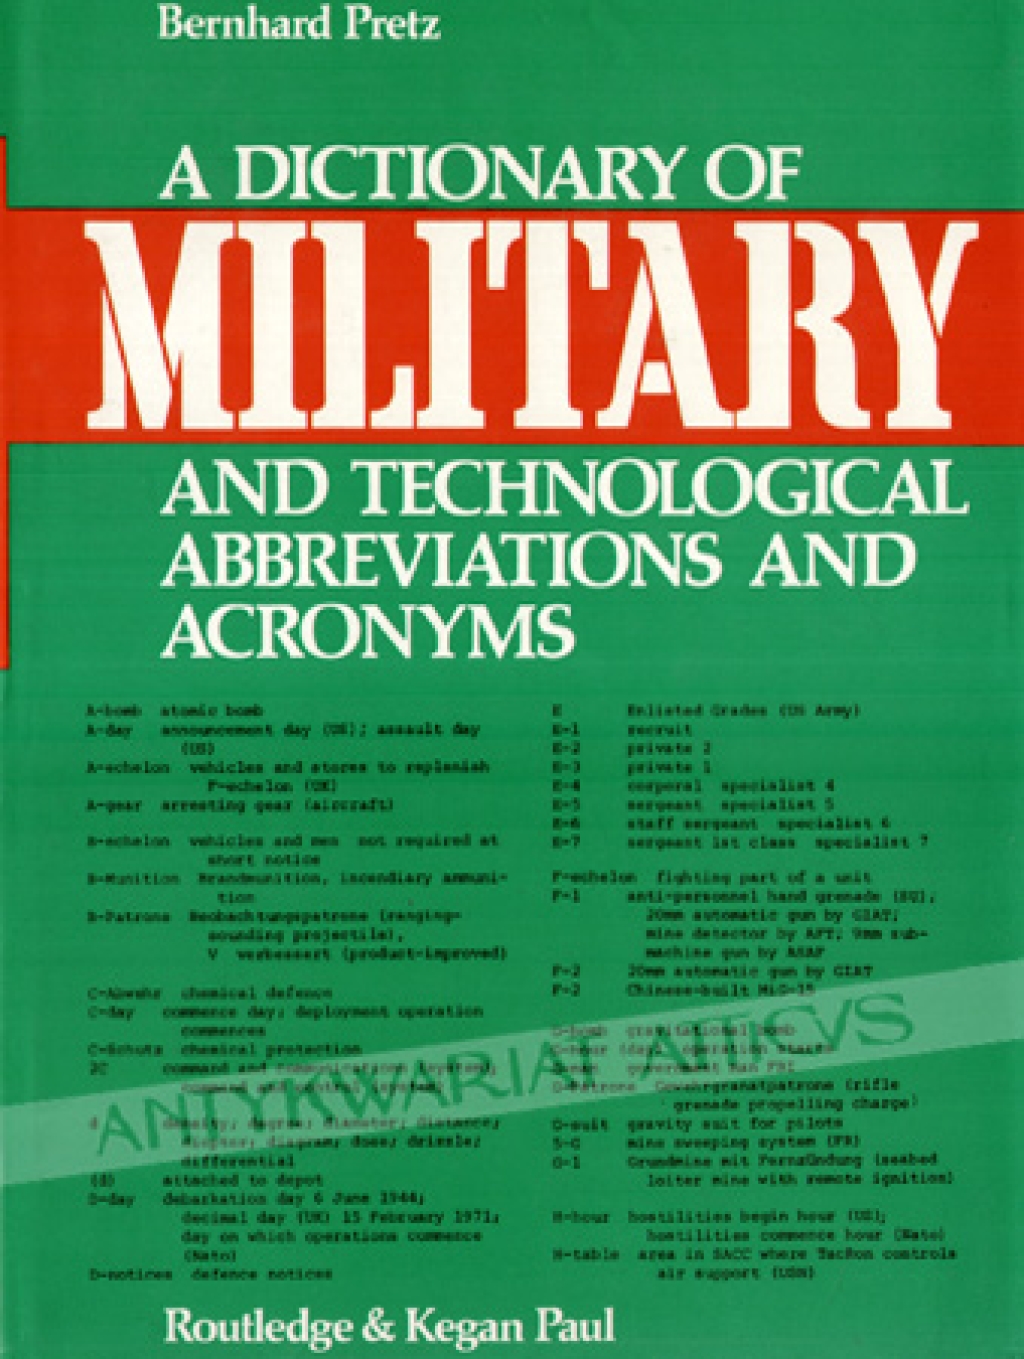 A Dictionary of Military and Technological Abbreviations and Acronyms